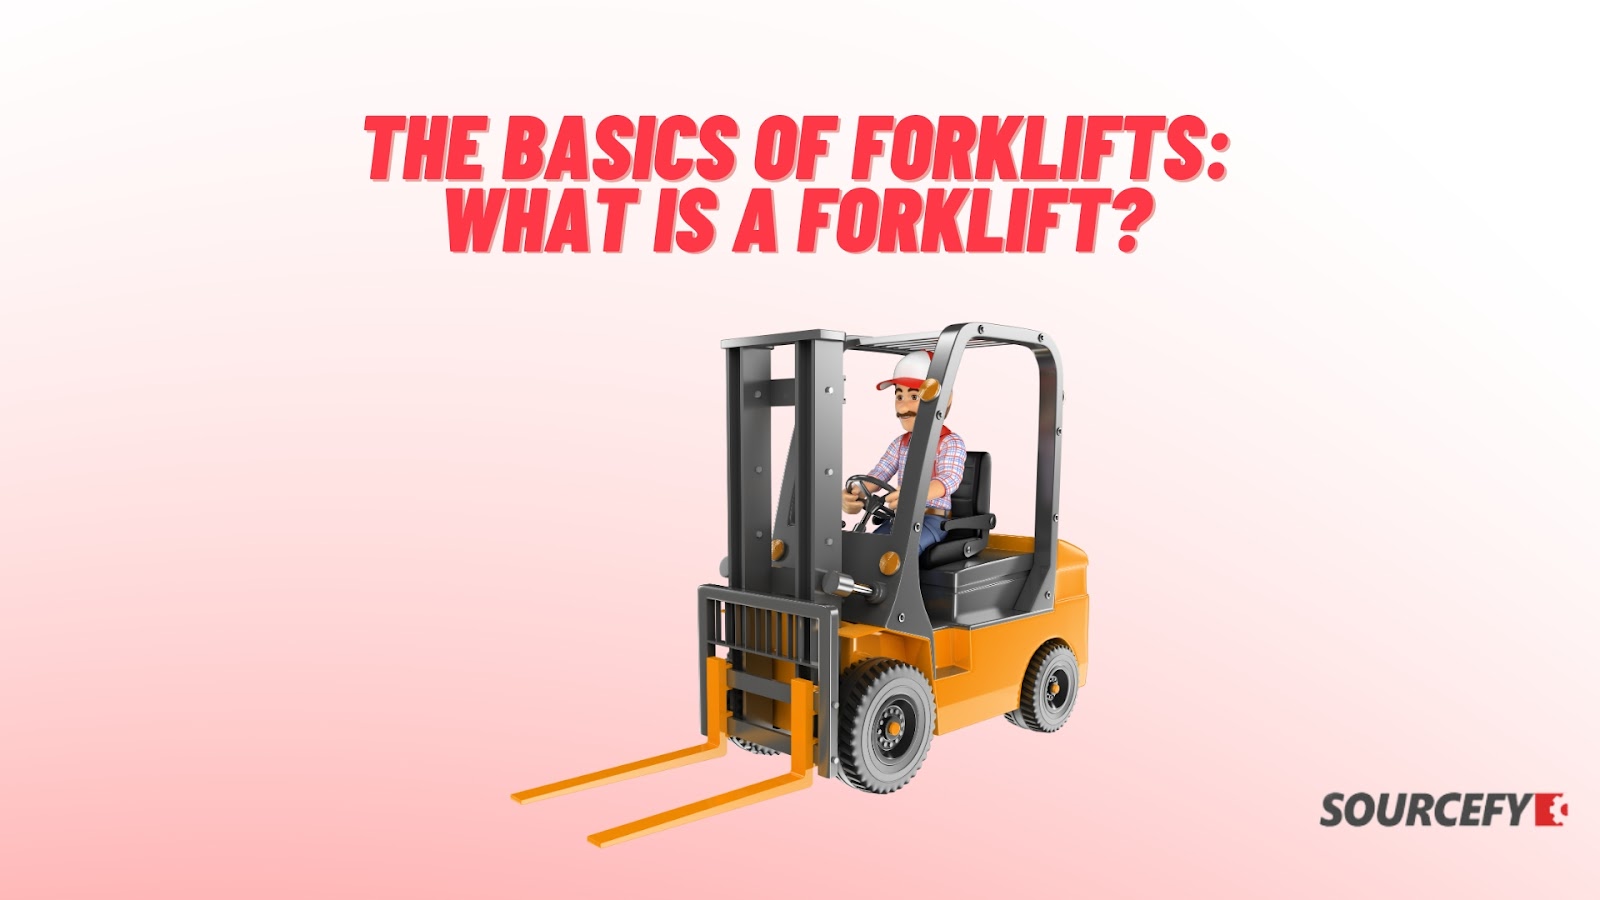 The Basics of Forklifts: What is a Forklift?